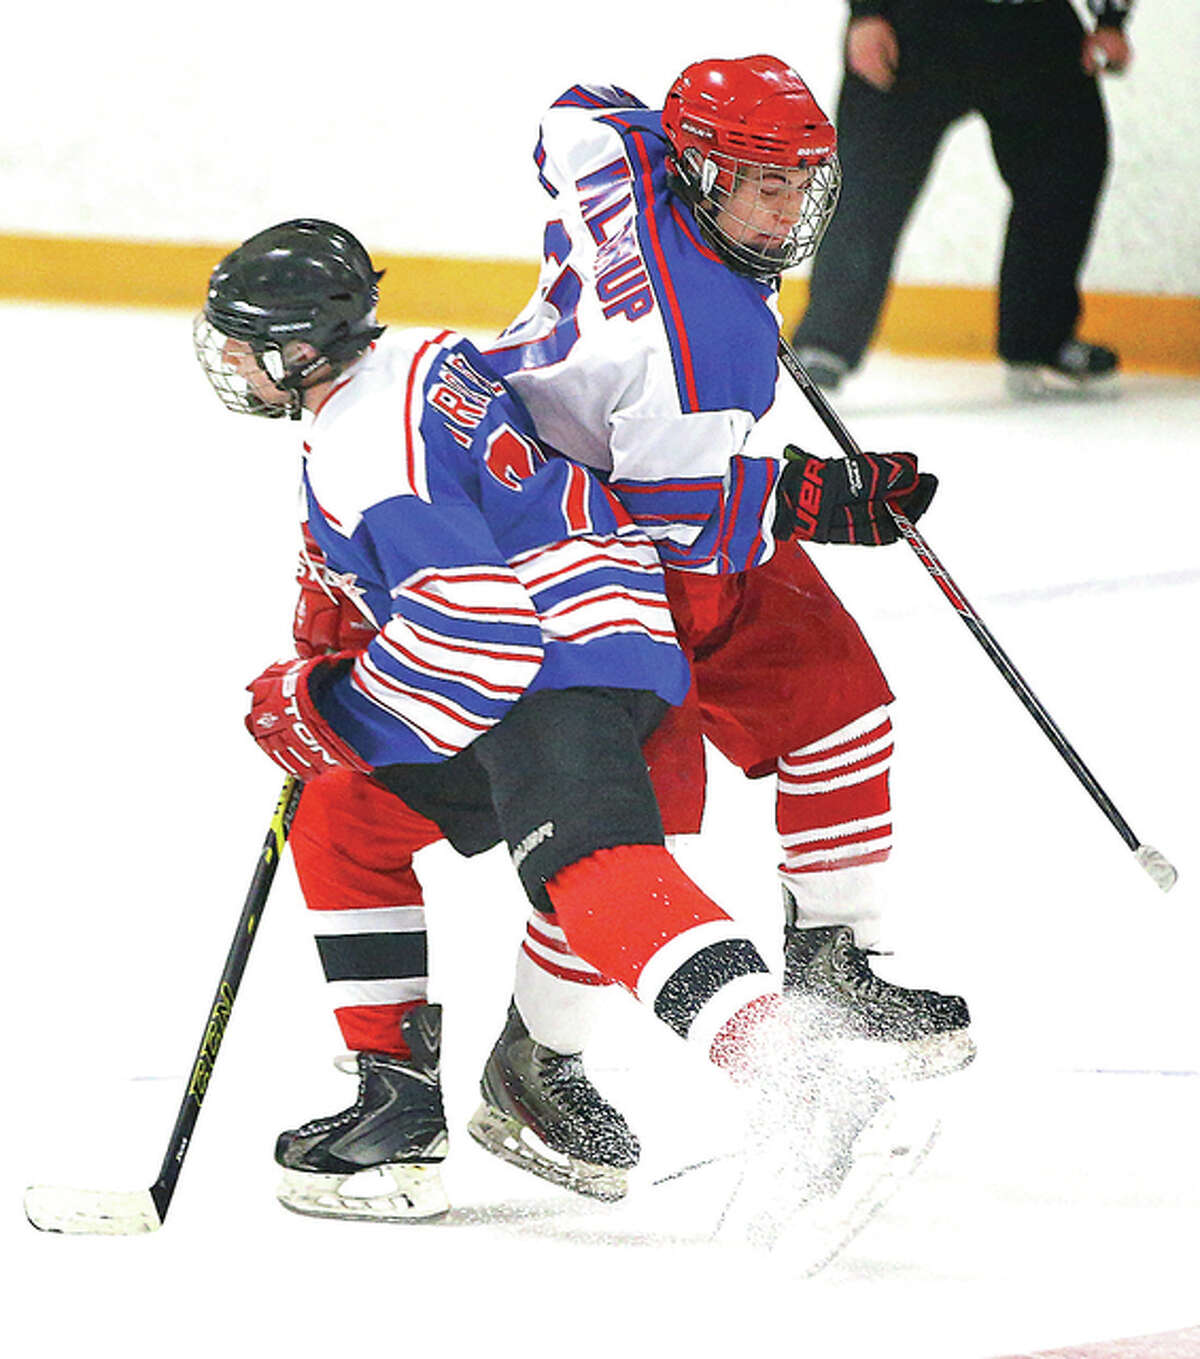 Alton’s Scotty Waldrup (back right) and Highland’s Brock Troxell collide at center ice Monday night during the MVCHA Class 1A All-Star Game at the East Alton Ice Arena.